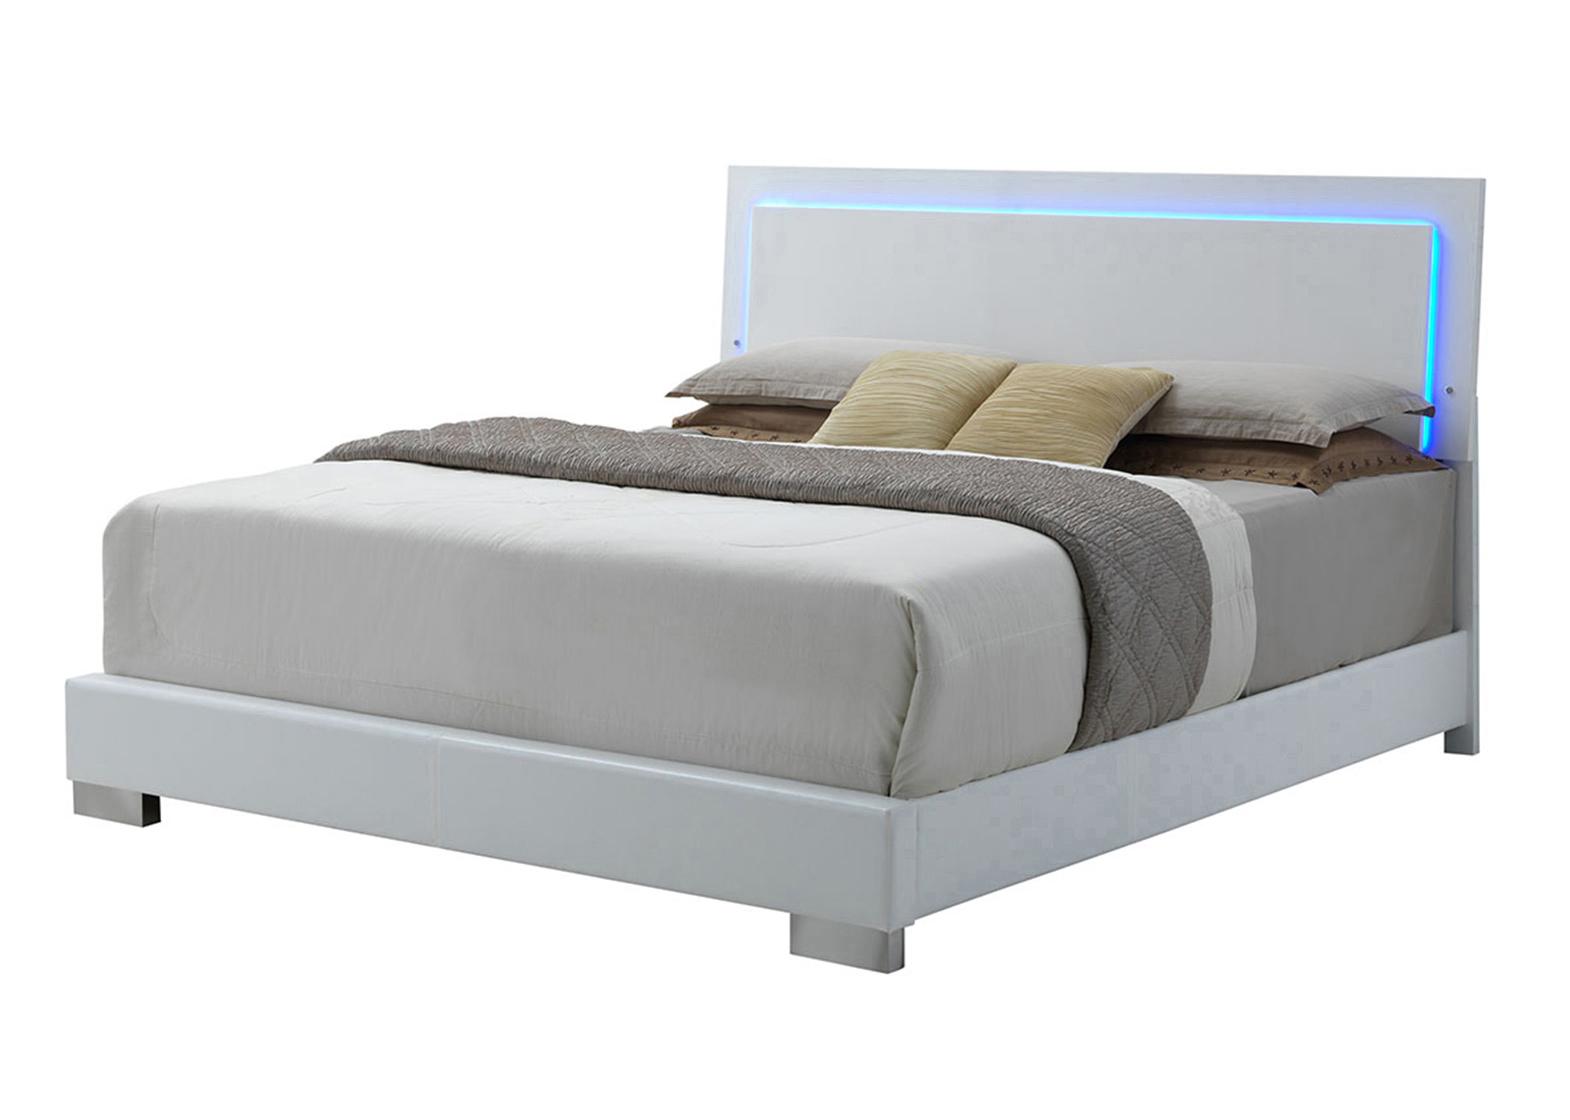 

    
Contemporary Glossy White Wood CAL Bed Coaster 203500KW Felicity
